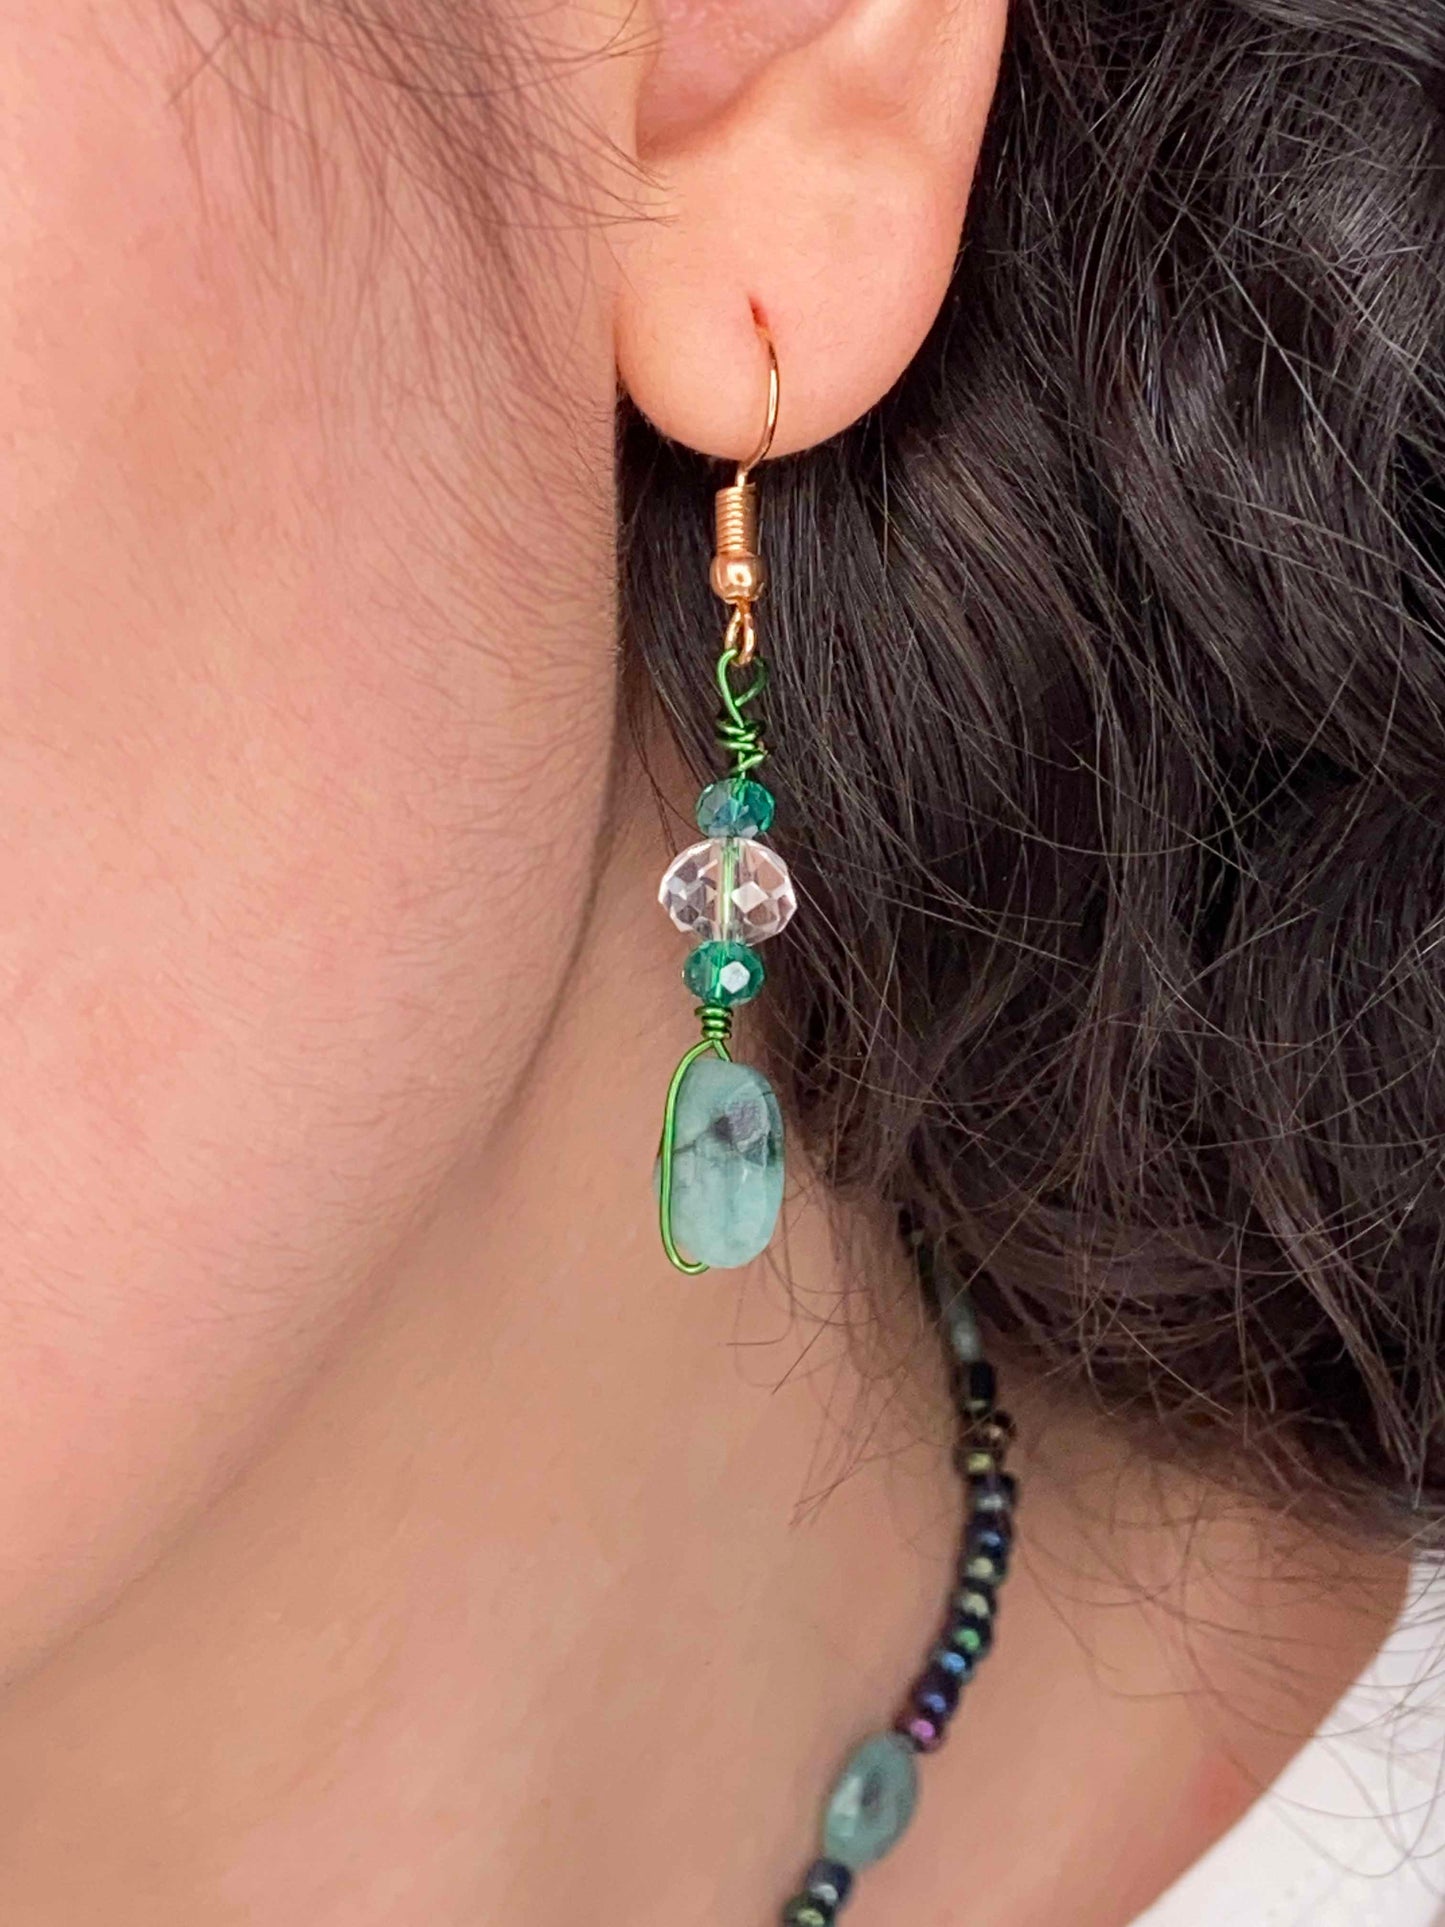 handmade wire wrapped emerald earrings with crystal beads.